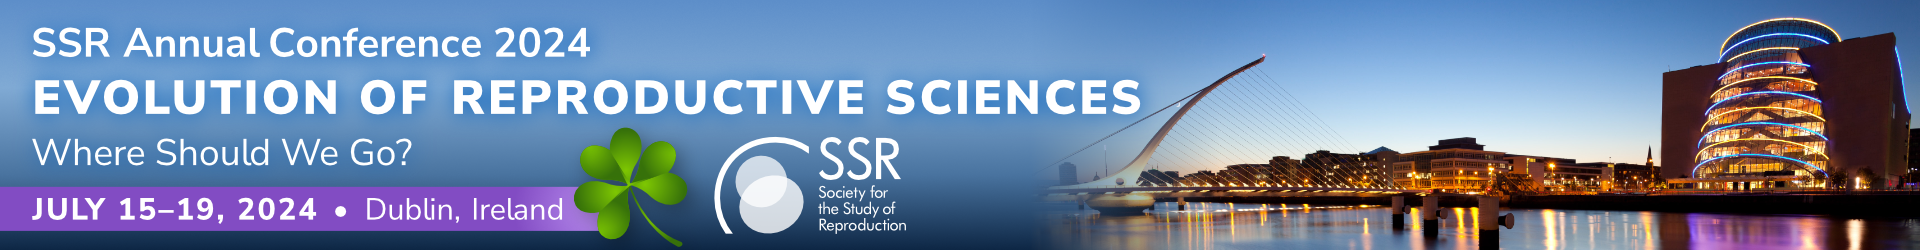 SSR 2024 Annual Conference  Event Banner